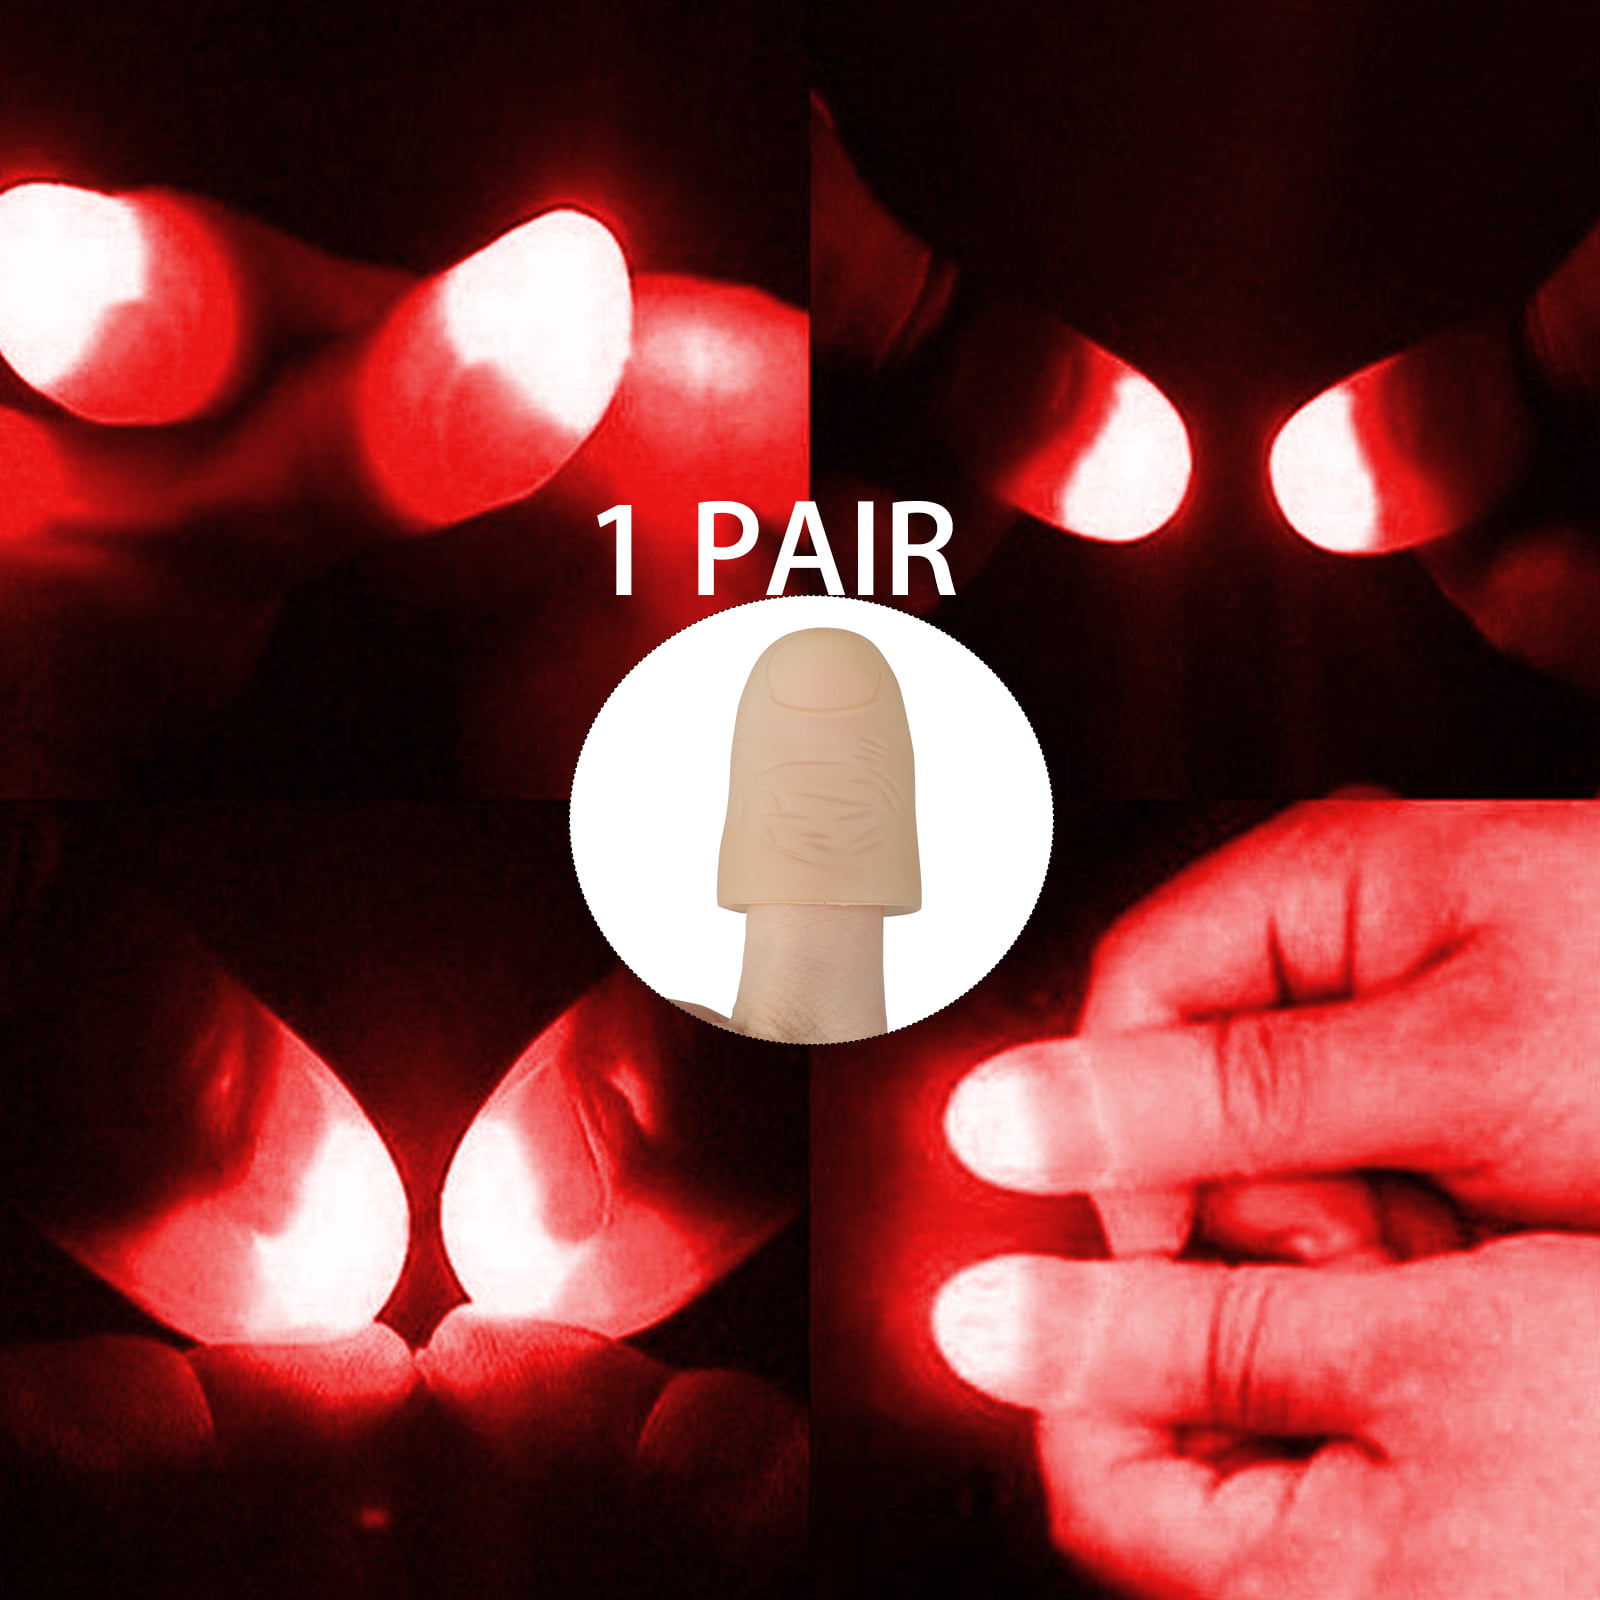 1 Pair LED Magic Light Up Silicone Thumbs Props Fingers Trick Lights Prank X0Y9 